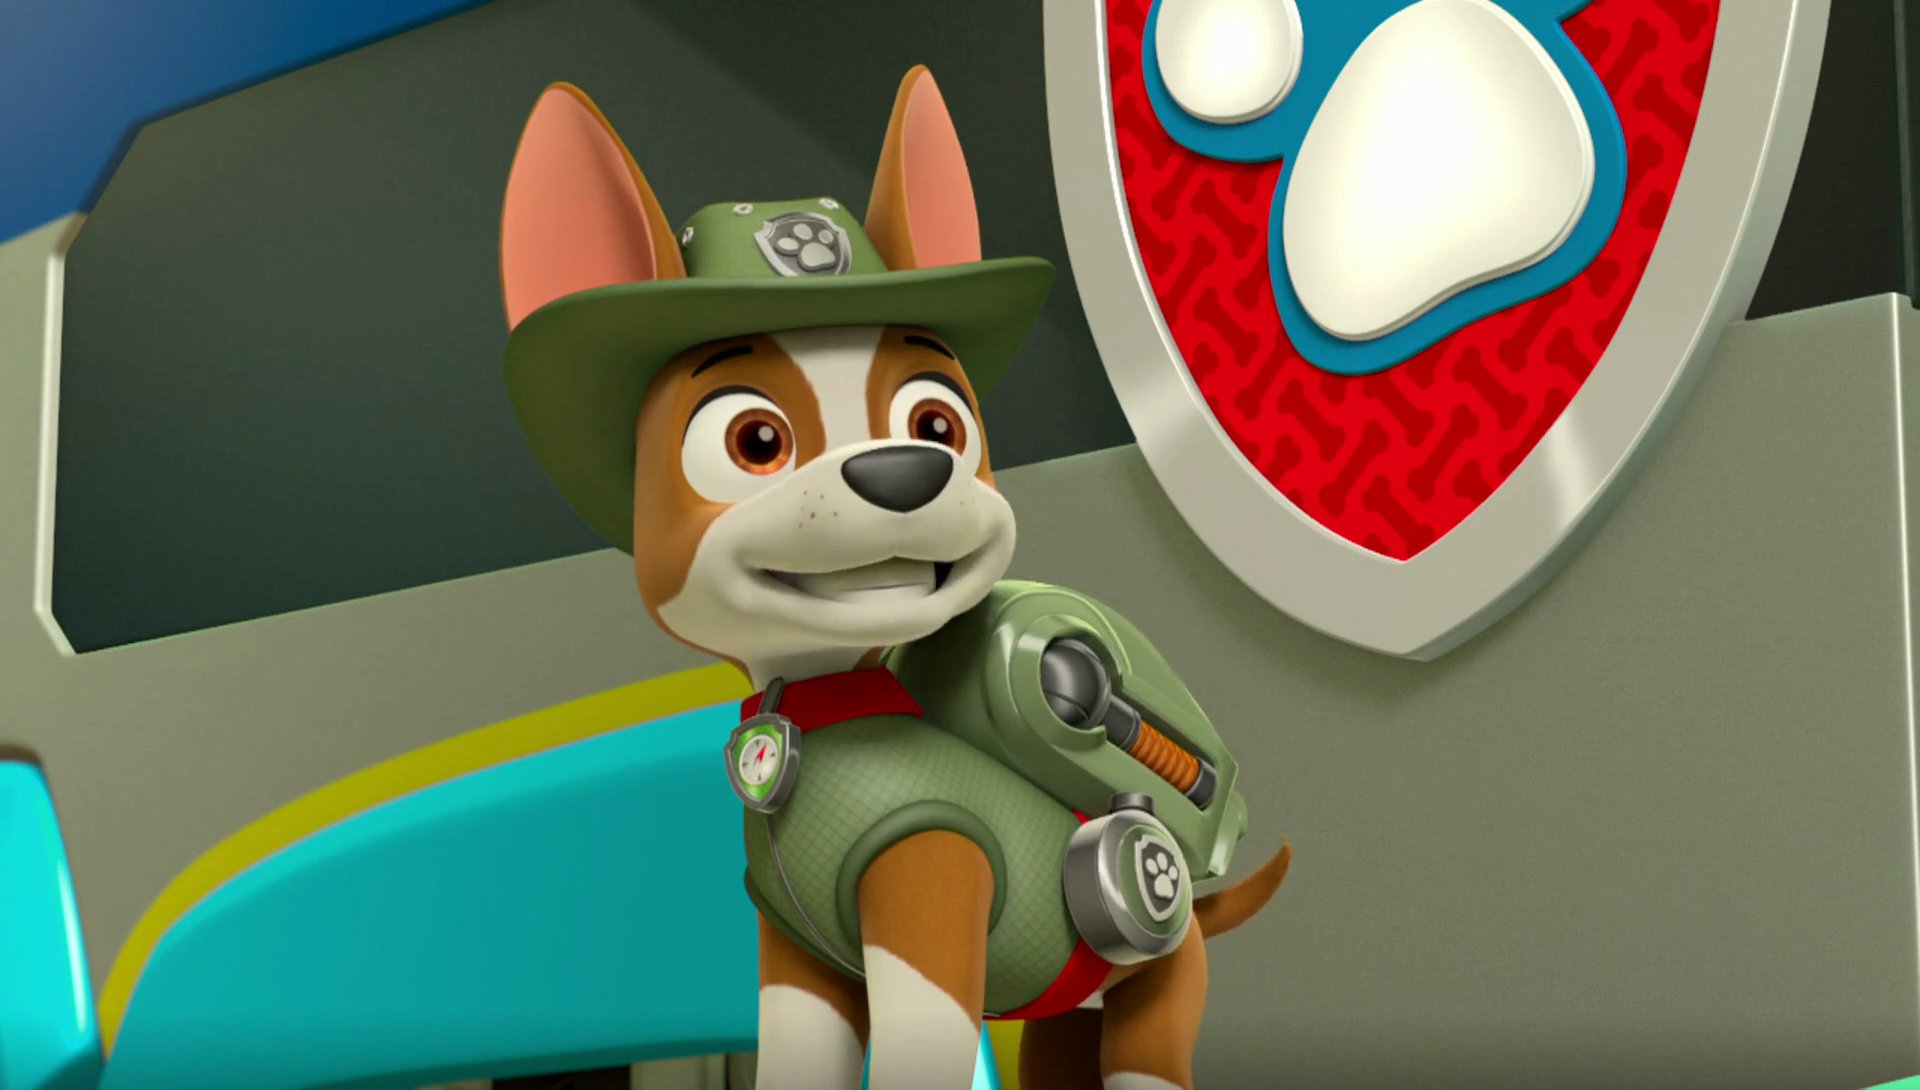 Patrol Wiki na Twitteru: "Tracker has made PAW Patrol debut! What are your thoughts on the team's new addition? https://t.co/NrVx75F3m8" / Twitter